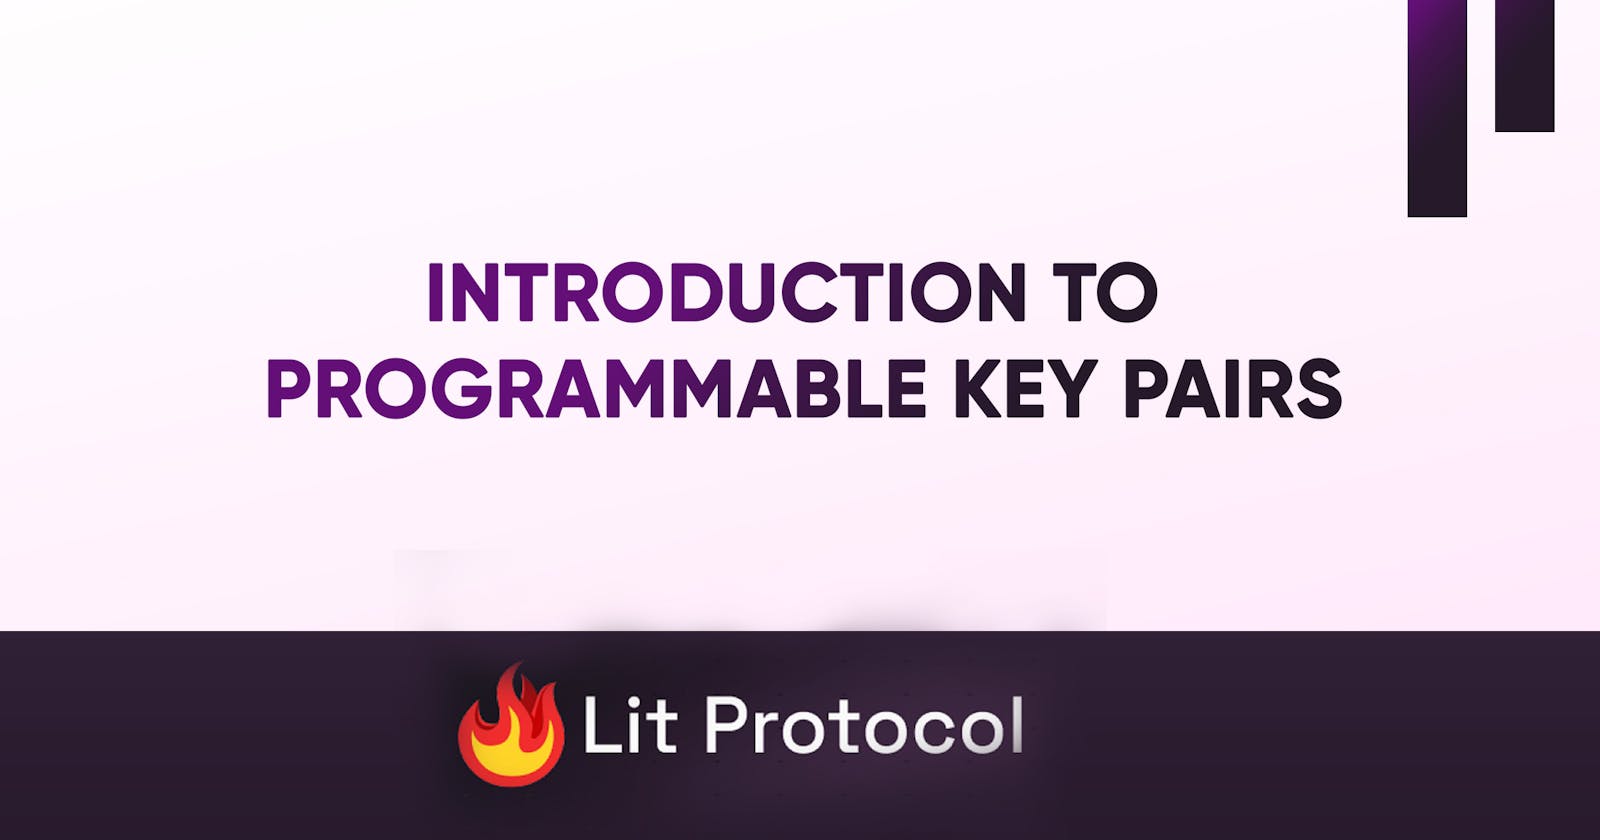 Programmable Key Pairs